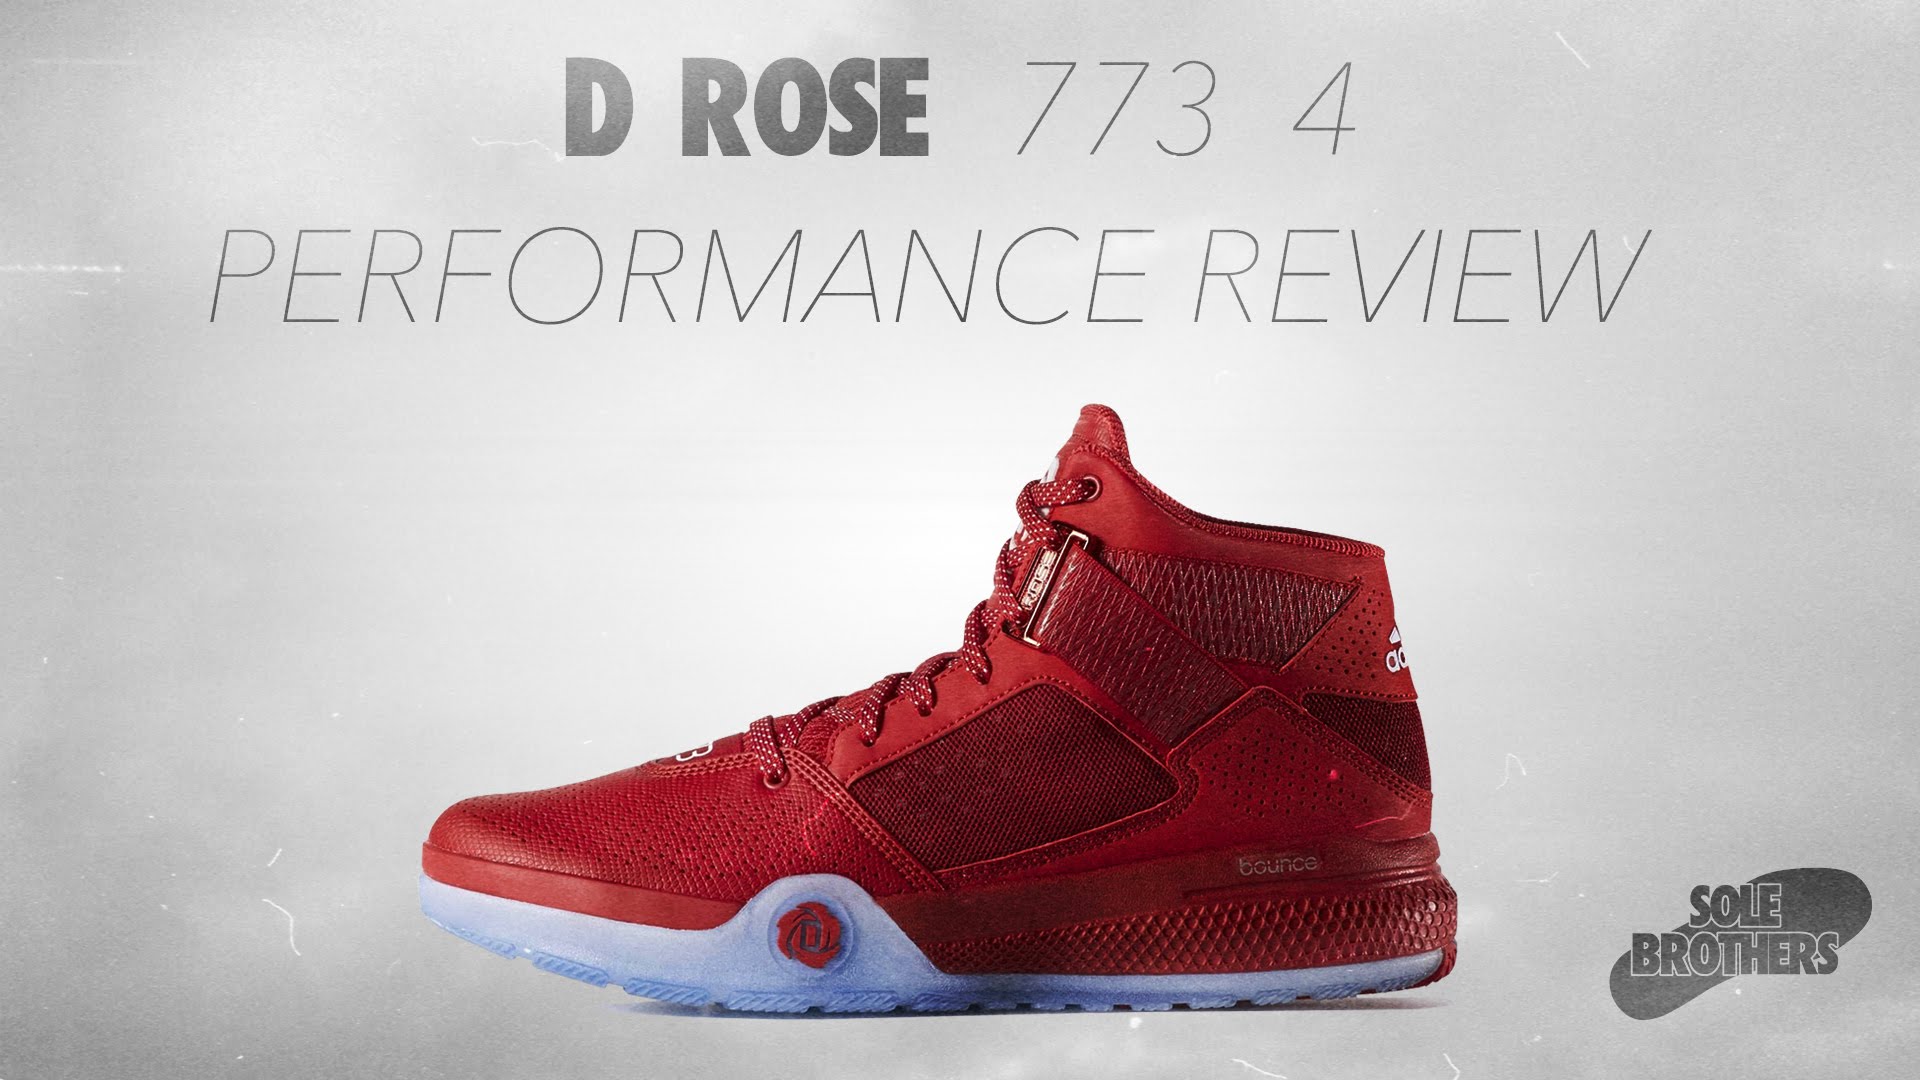 Adidas D Rose 773 4 Performance Review! - YouTube